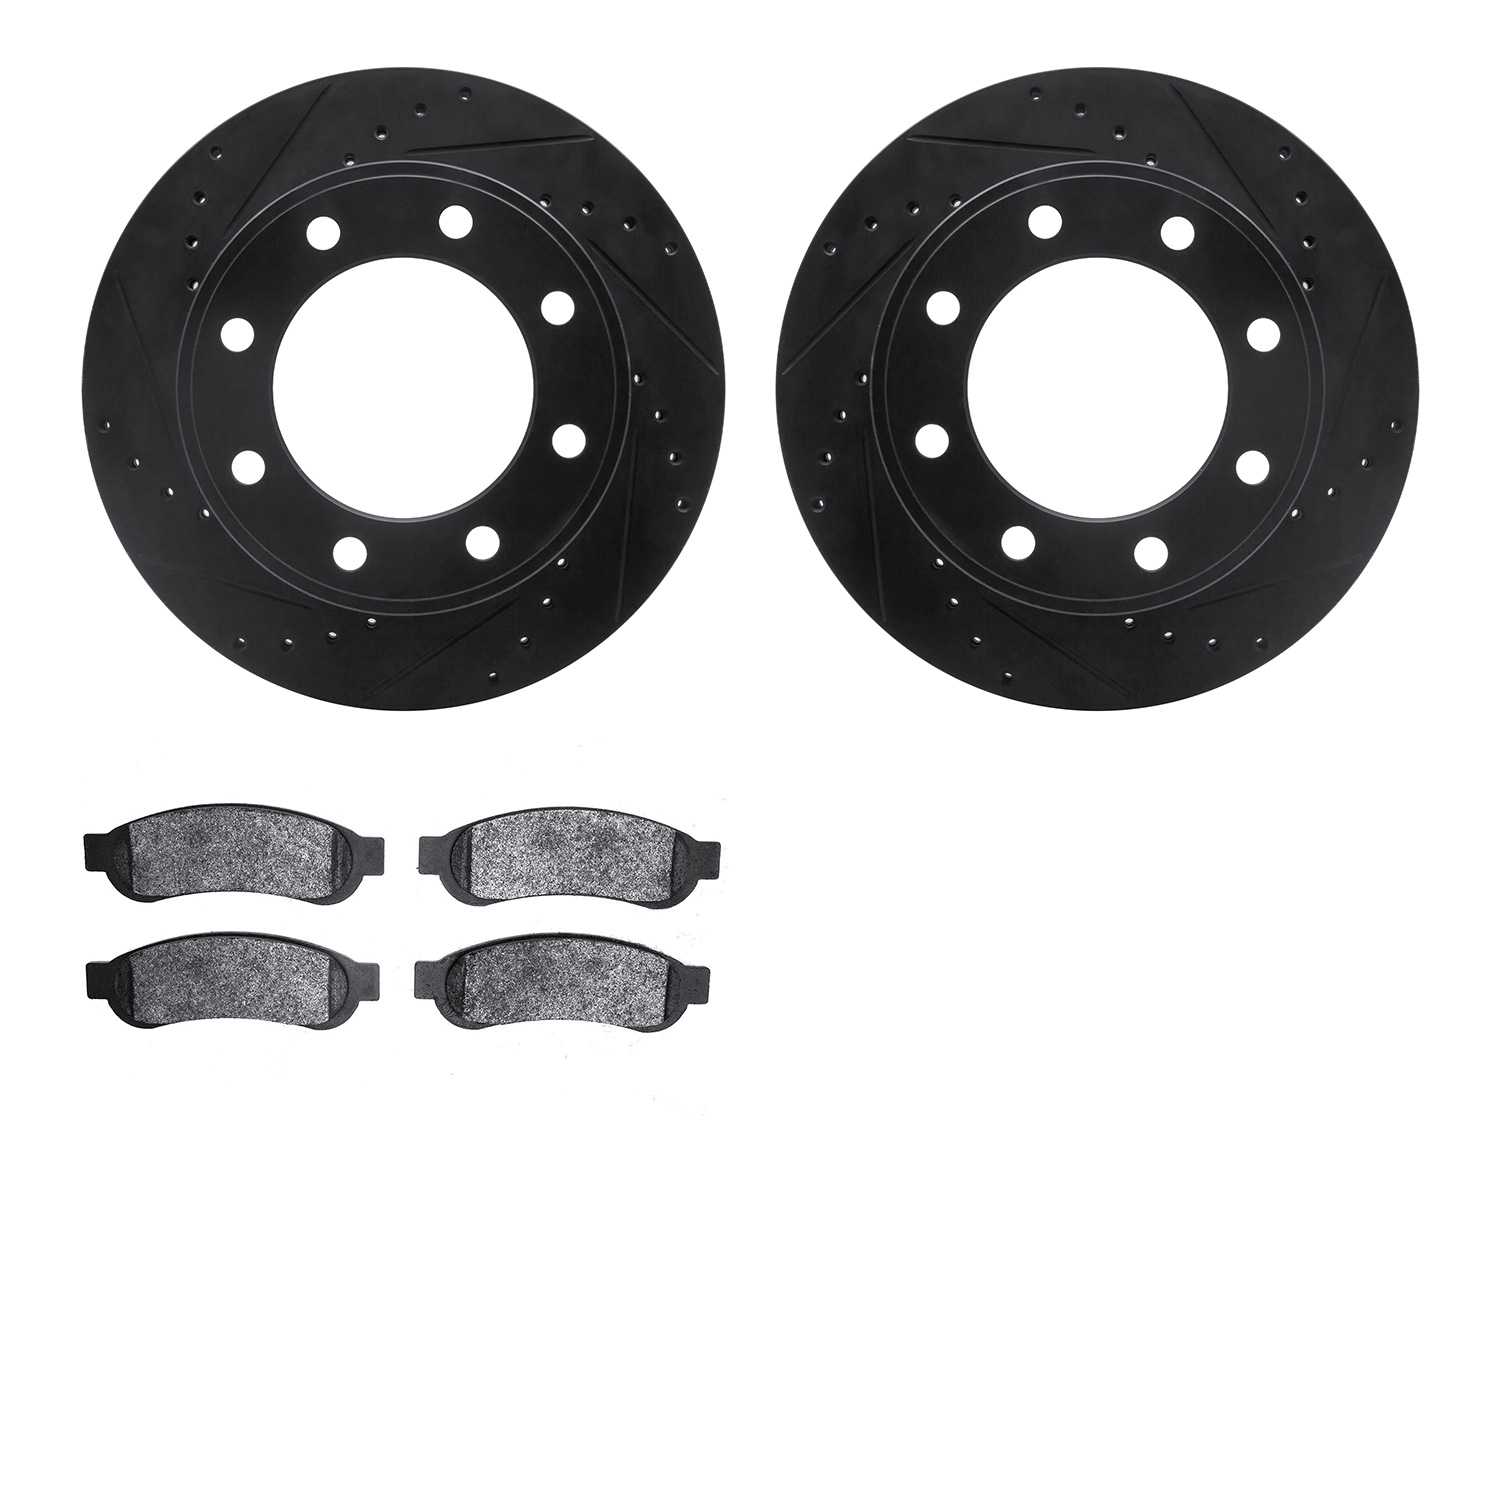 8402-54084 Drilled/Slotted Brake Rotors with Ultimate-Duty Brake Pads Kit [Black], 2010-2012 Ford/Lincoln/Mercury/Mazda, Positio